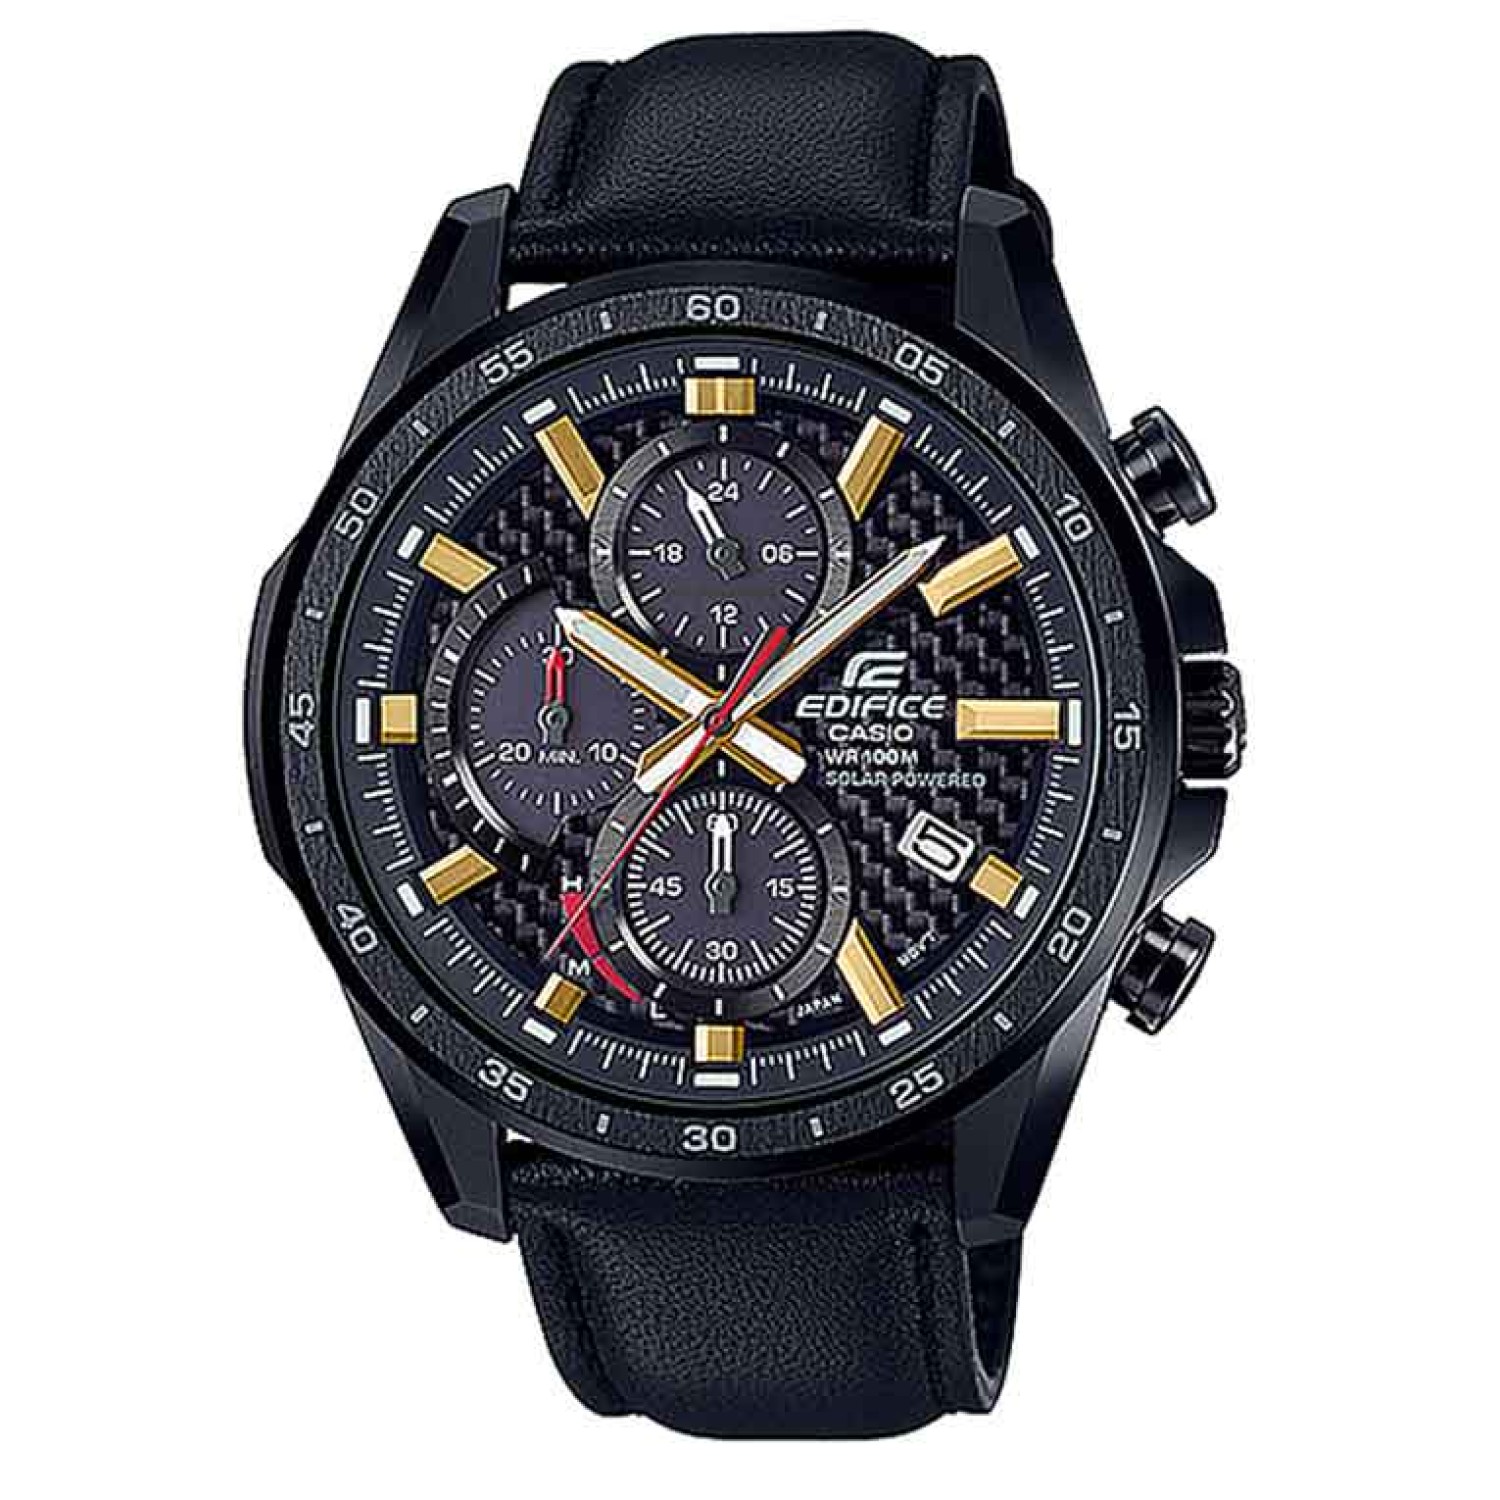 EQS900CL-1AV Casio EDIFICE Chronograph Watch.   This model is the latest solar-powered chronographs from the high performance EDIFICE lineup. The sporty designs of this motorsports concept timepiece is created using carbon fiber, an essential material f @